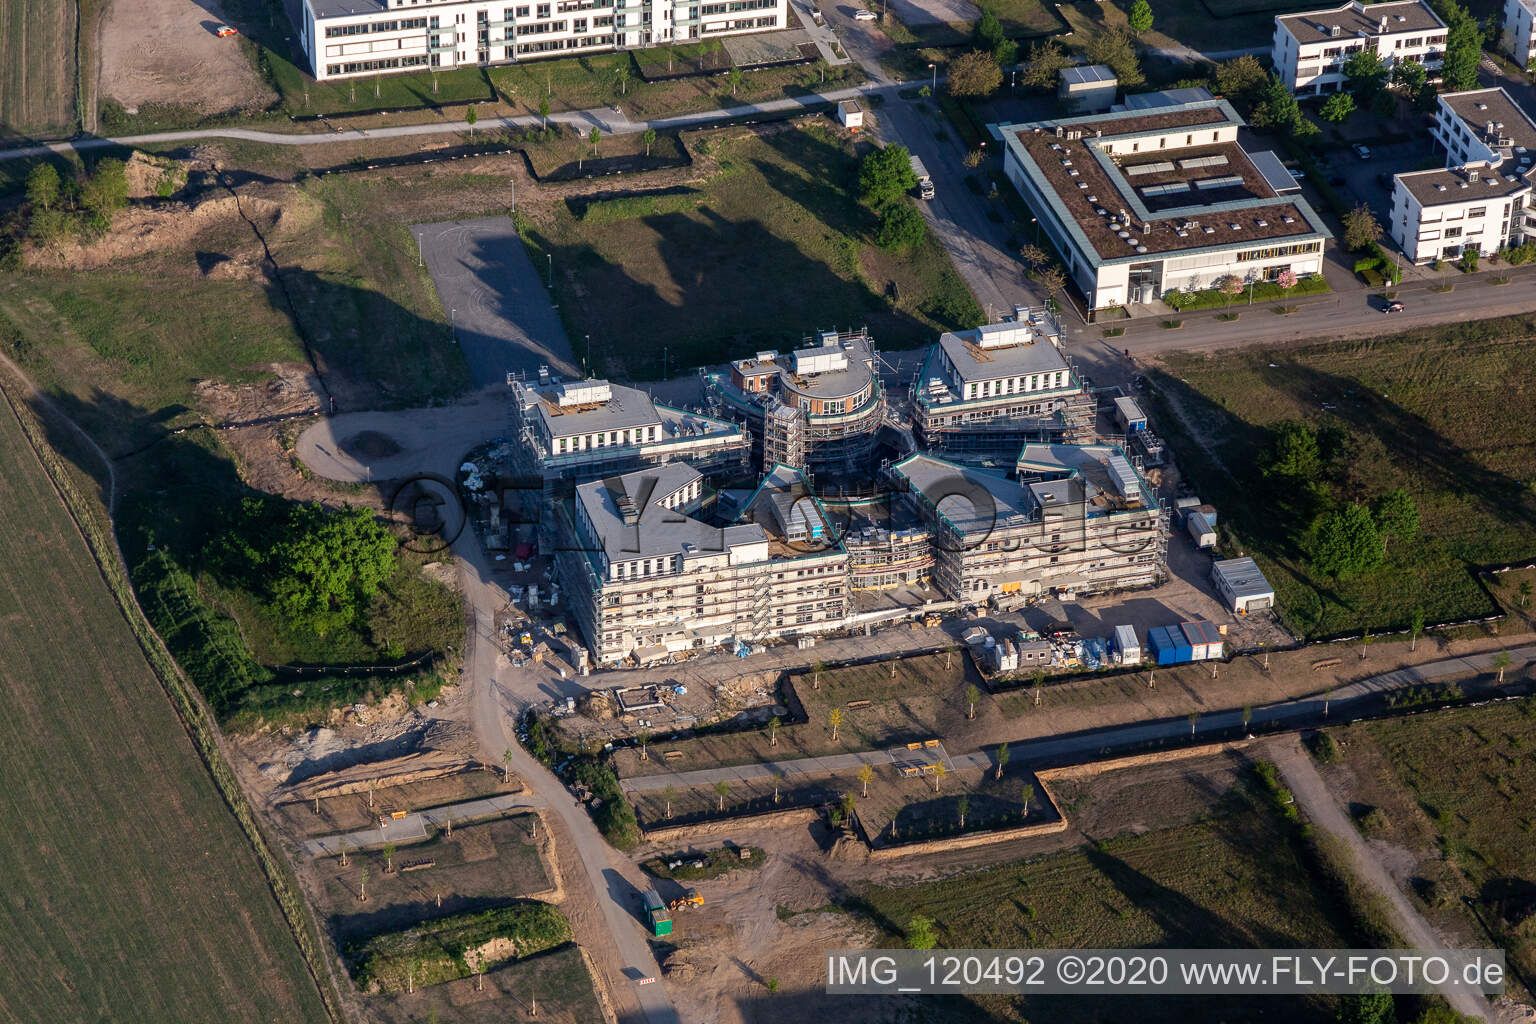 Construction site of the LTC - Linder Technology Campus on Wilhelm-Schickard-Straße in the Technology Park Karlsruhe in the district Rintheim in Karlsruhe in the state Baden-Wuerttemberg, Germany viewn from the air